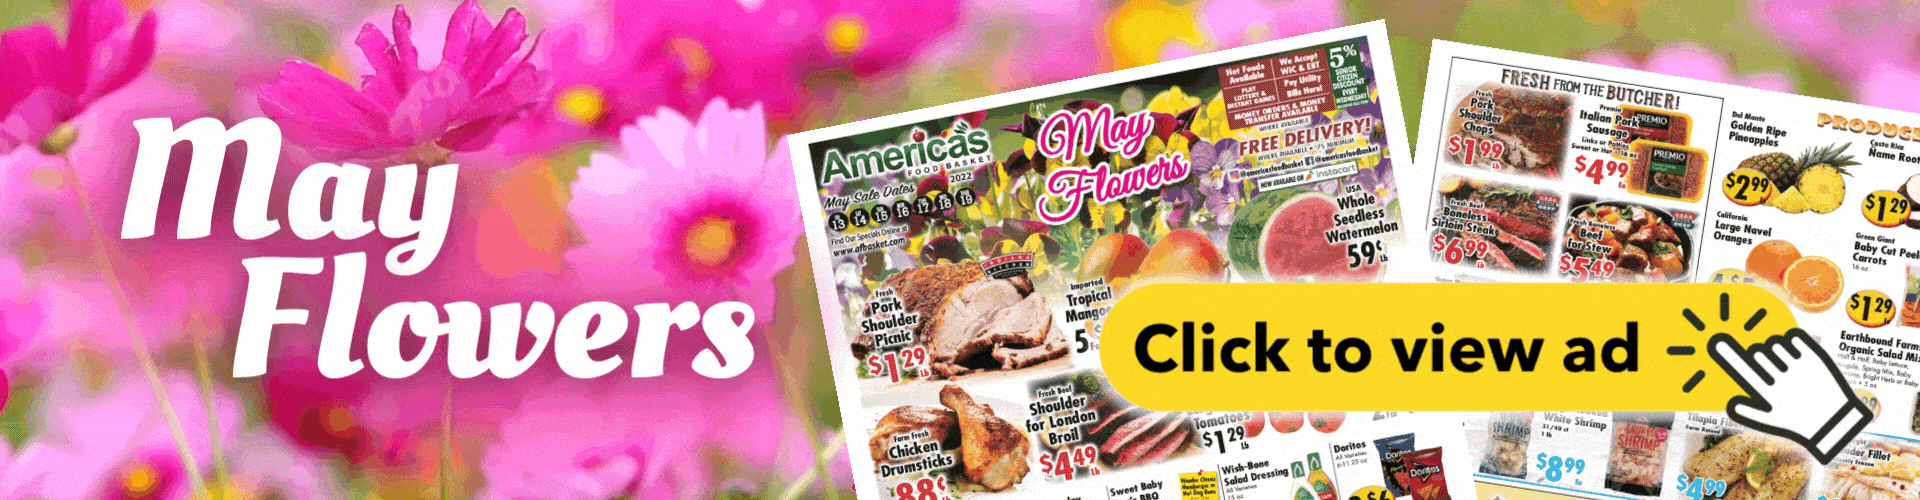 Click this image to view our America's Food Basket weekly circular valid from May 13 to May 19